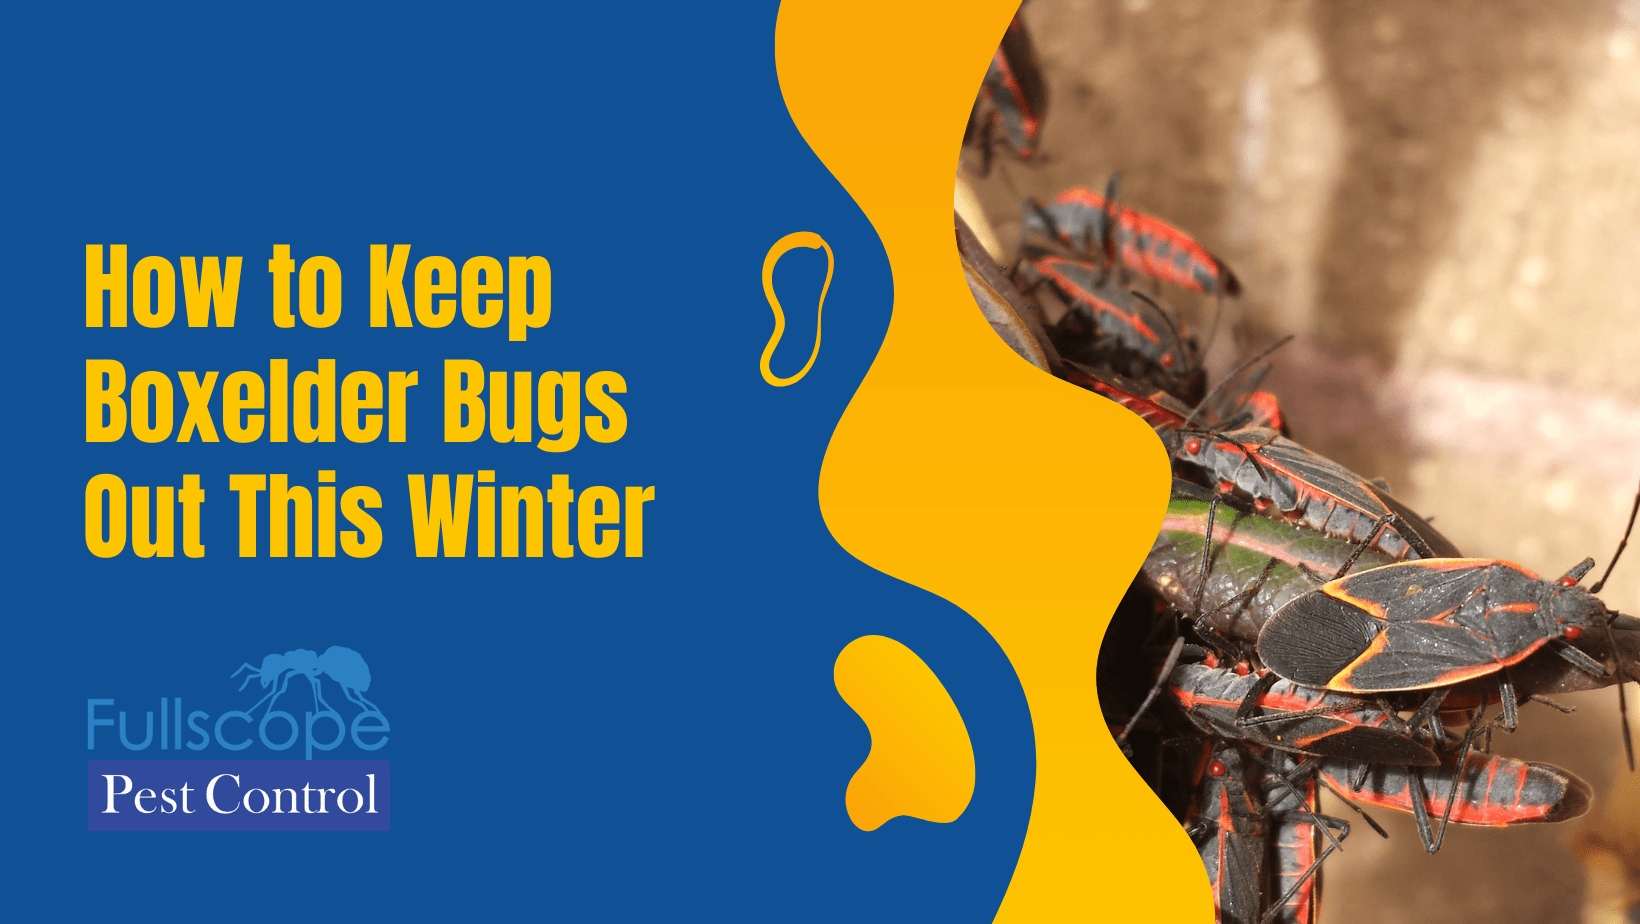 Keep boxelder bugs out this winter